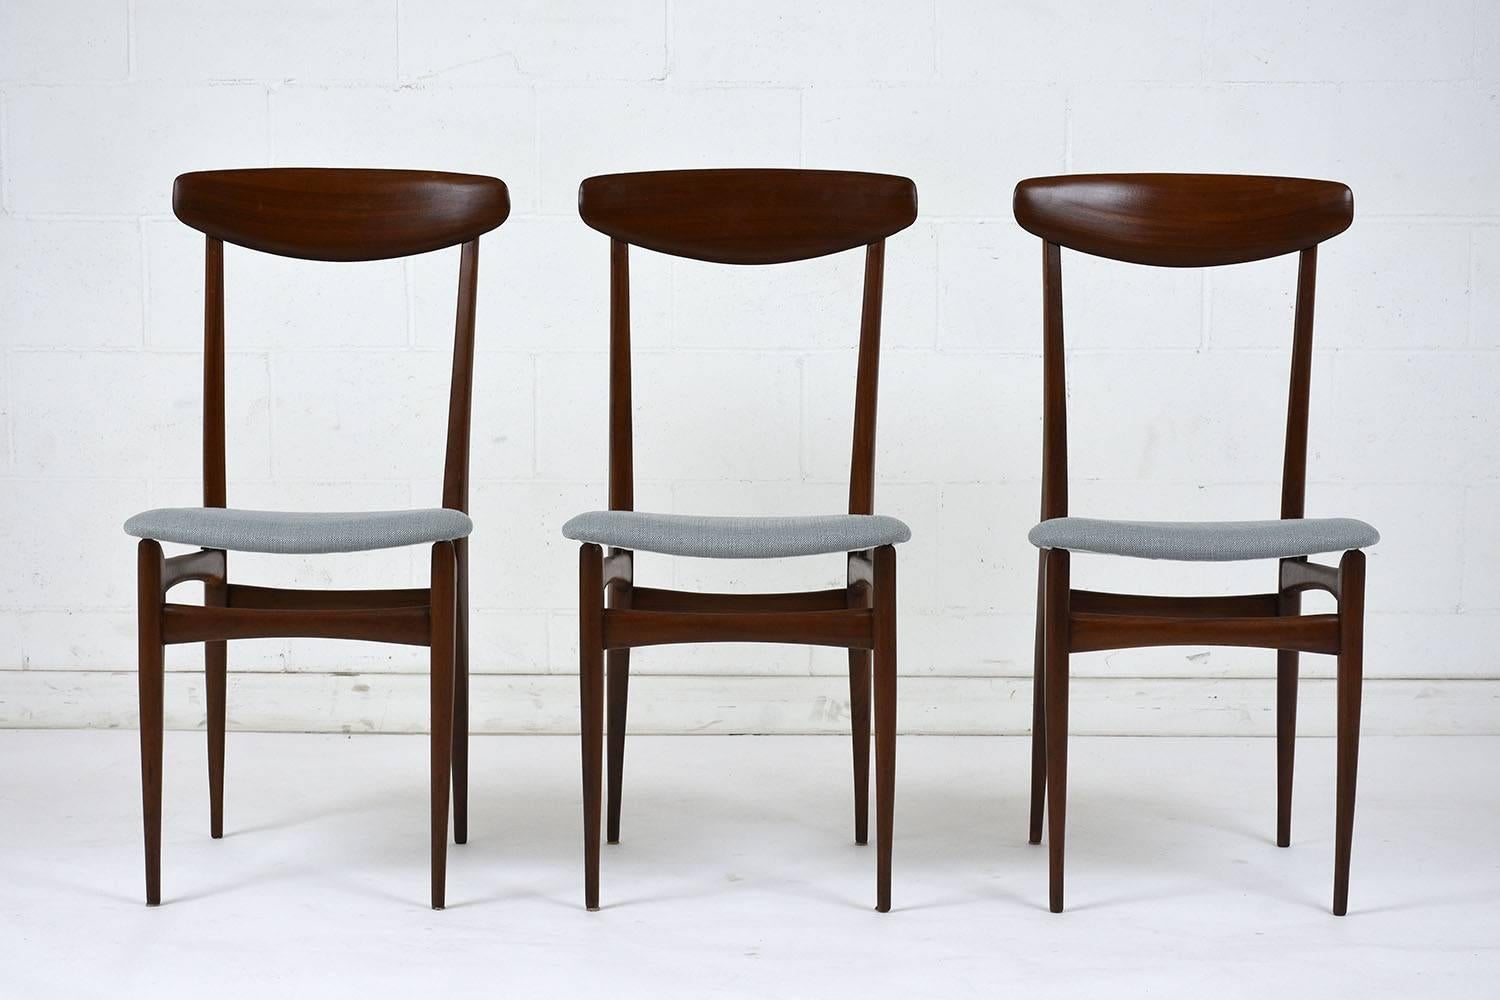 This set of six 1960s Danish Mid-Century Modern style teak wood dining chairs are stained a deep walnut with a polished finish. The sleek frames have a curved top rail and tapered legs. The seats have recently been professionally upholstered in a